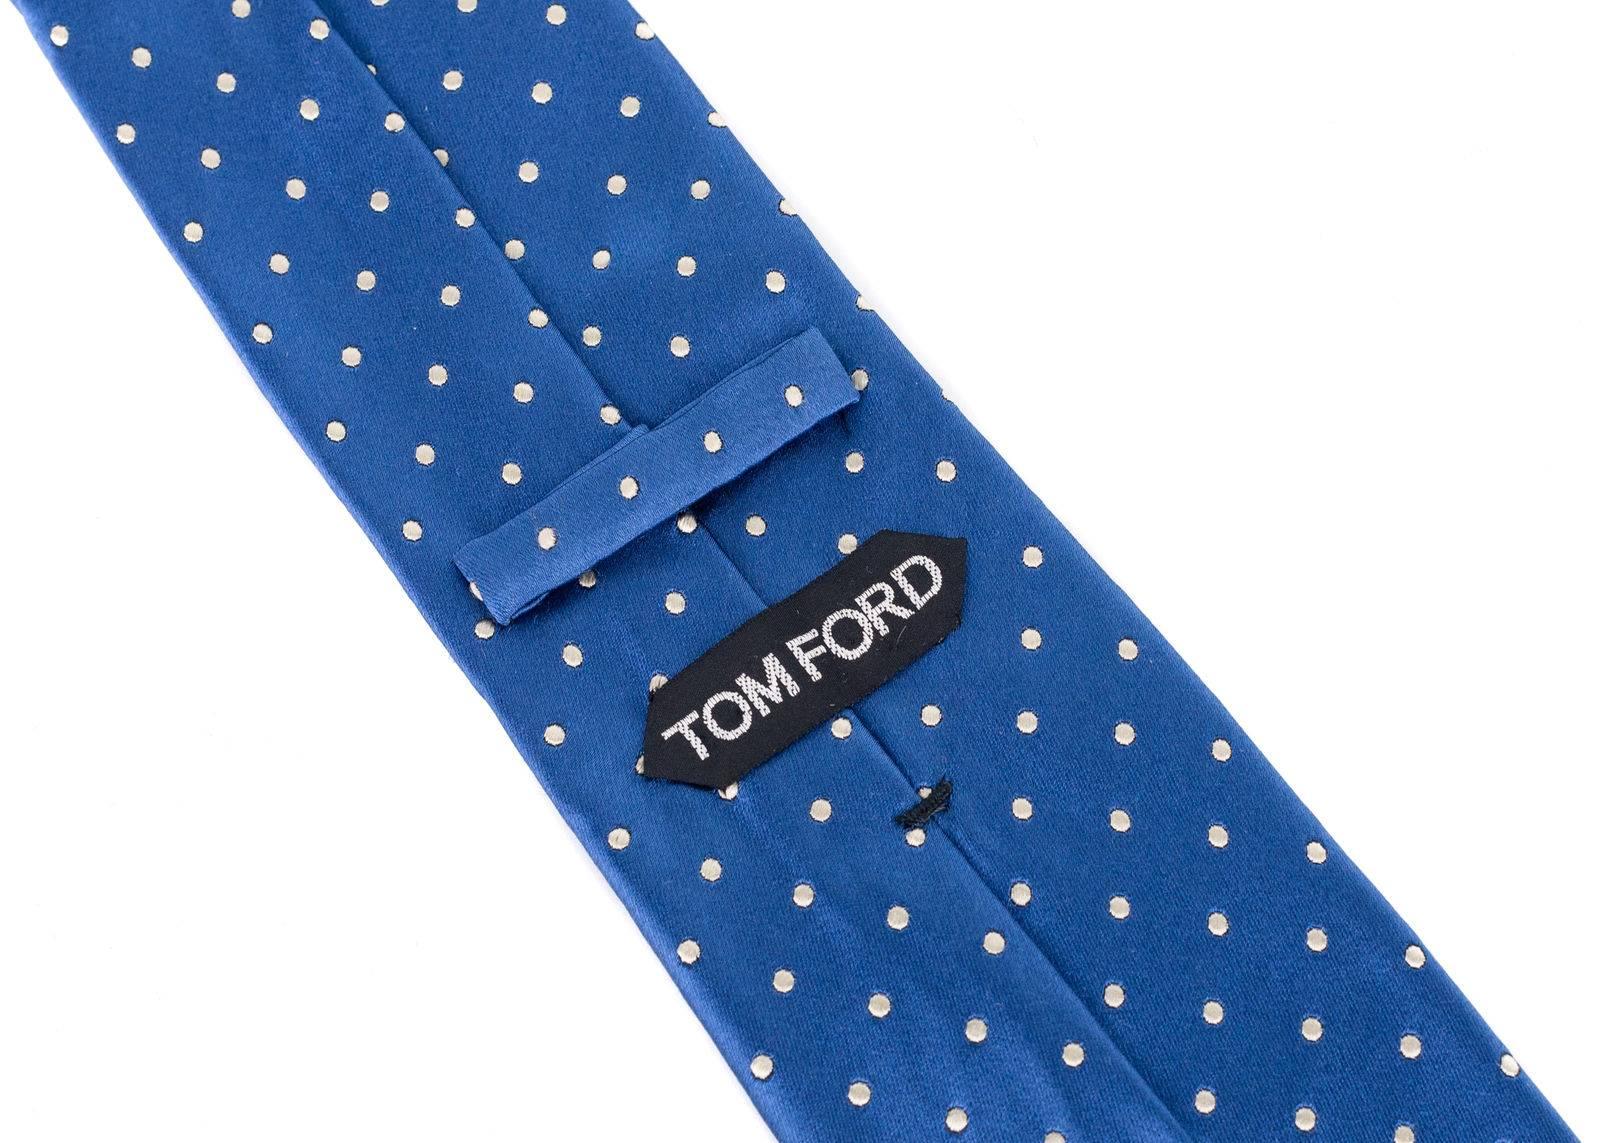 iTalian luxury brand, Tom Ford, has crafted these gorgeous Silk Tie for important special occasions and professional events. The tie is great to pair with your favorite solid color button down and blazers with your chosen pair or classic trousers.